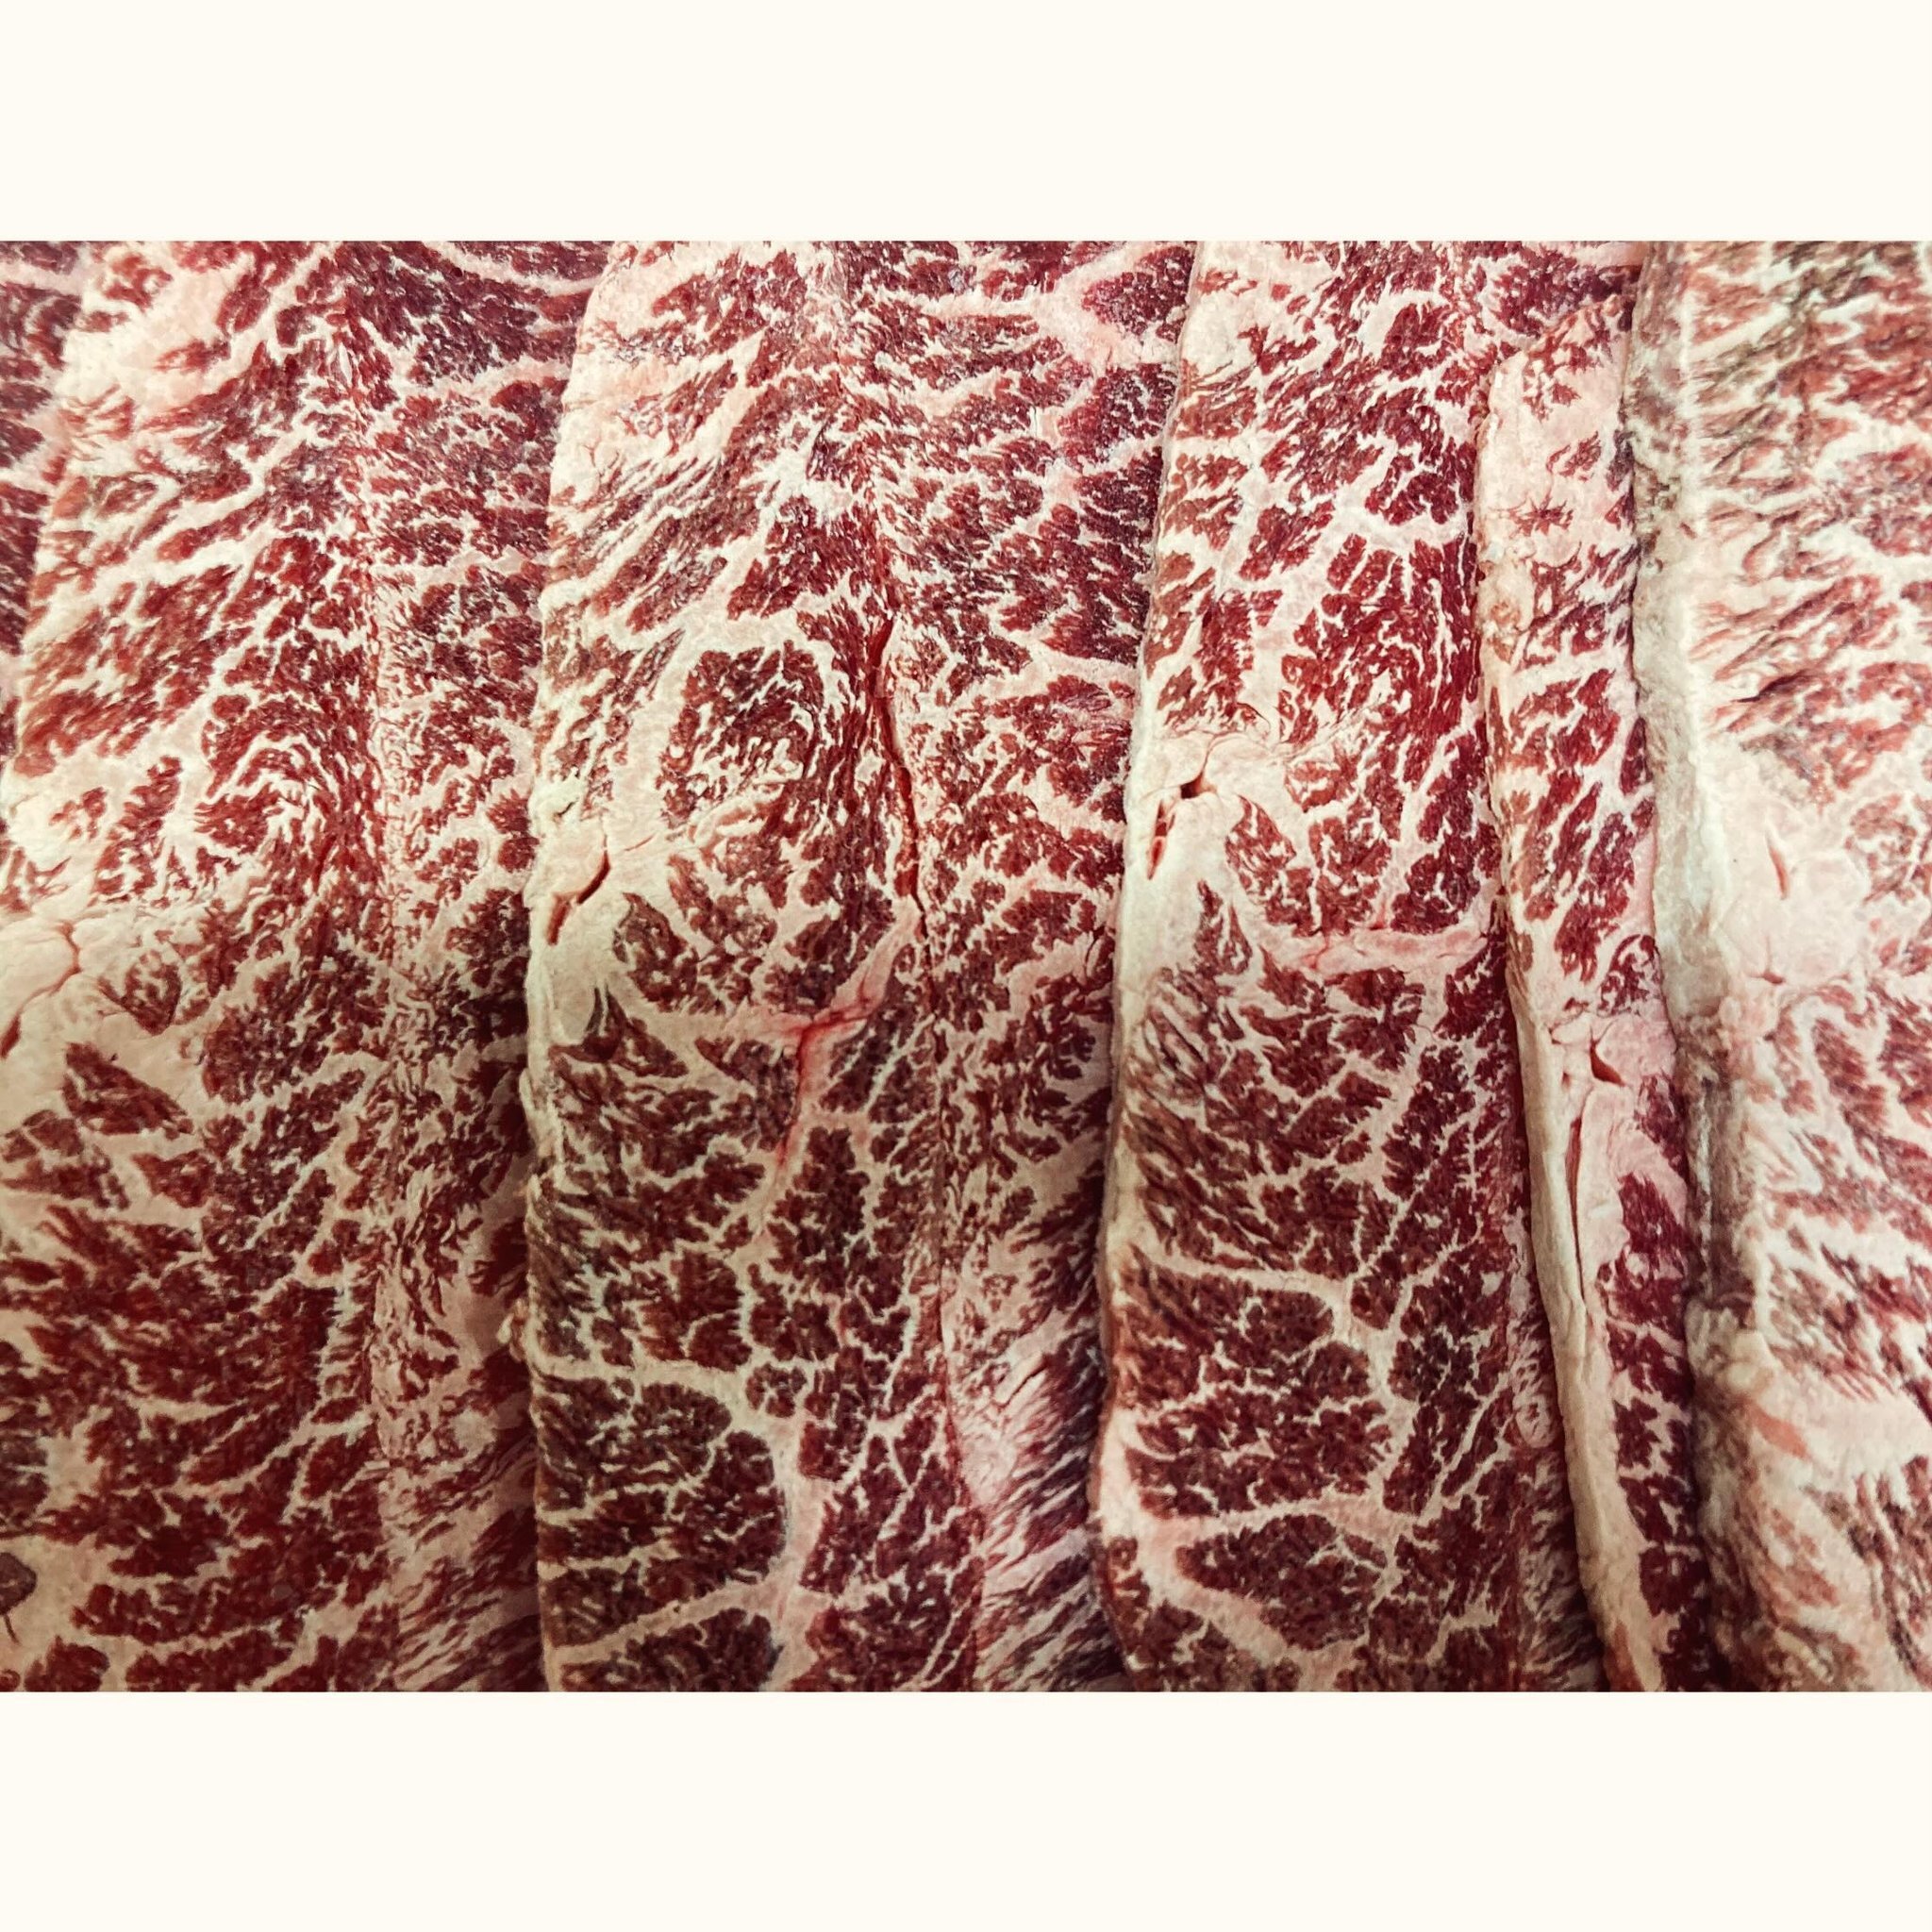 Really was surprised at the quality of @freedown.hills.wagyu when it arrived, this is the flatiron cut that we slice thin, sear it for seconds and cover in black pepper sauce. The searing lets those marbling fats melt in your mouth without losing the